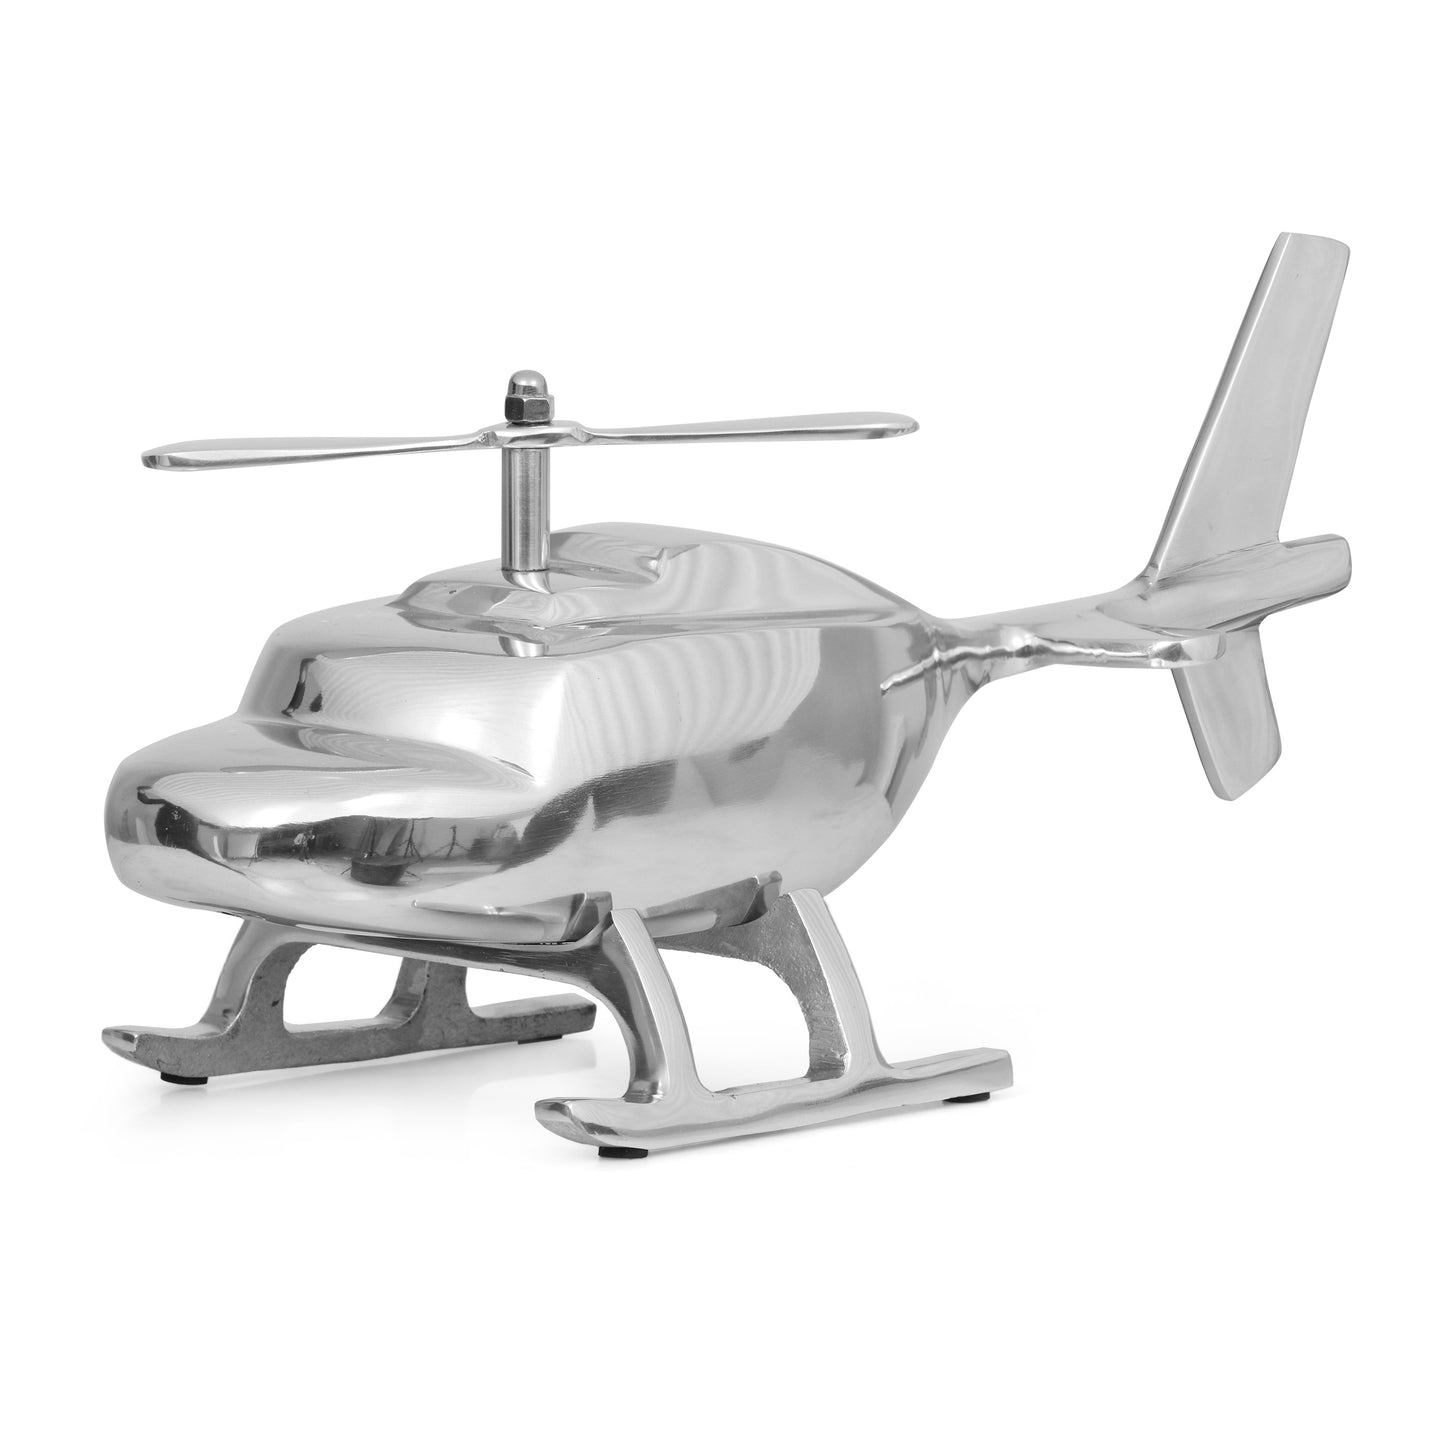 Bucyrus Handcrafted Aluminum Helicopter Decor, Silver